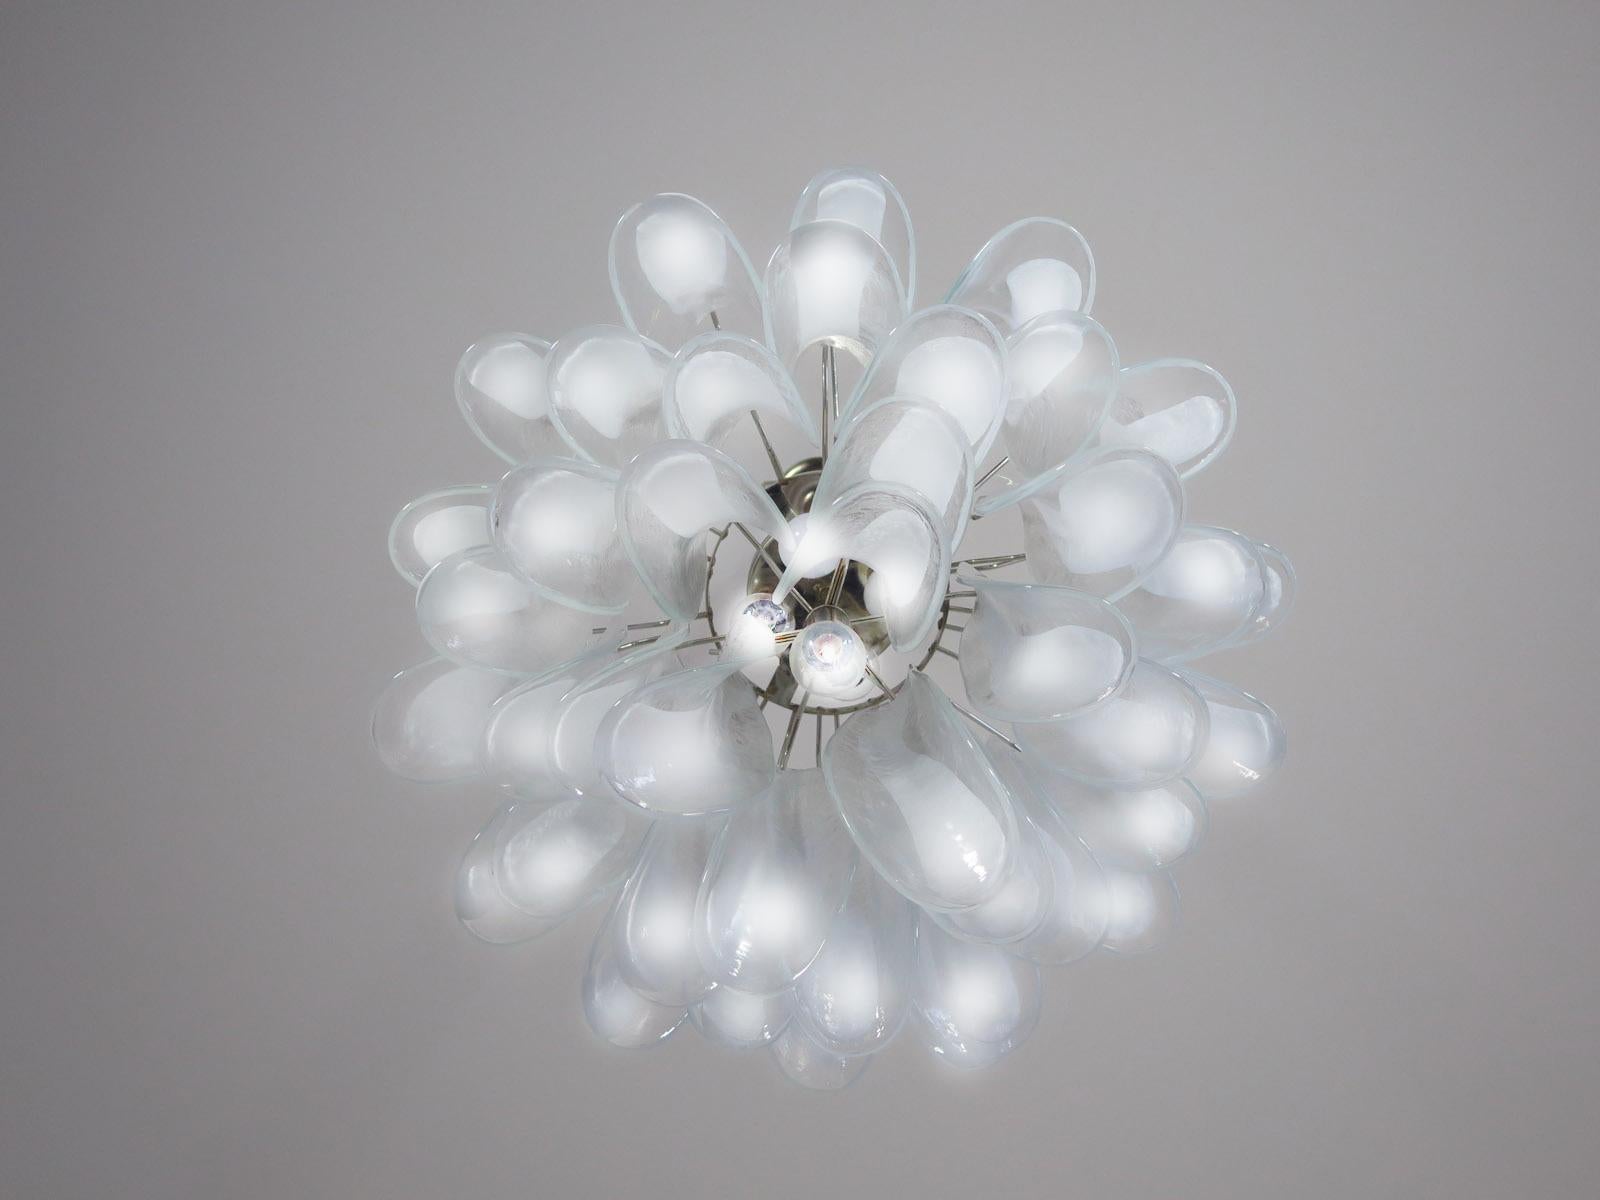 Pair of Italian 41 White Petal Murano Chandeliers, Mazzega Style For Sale 3